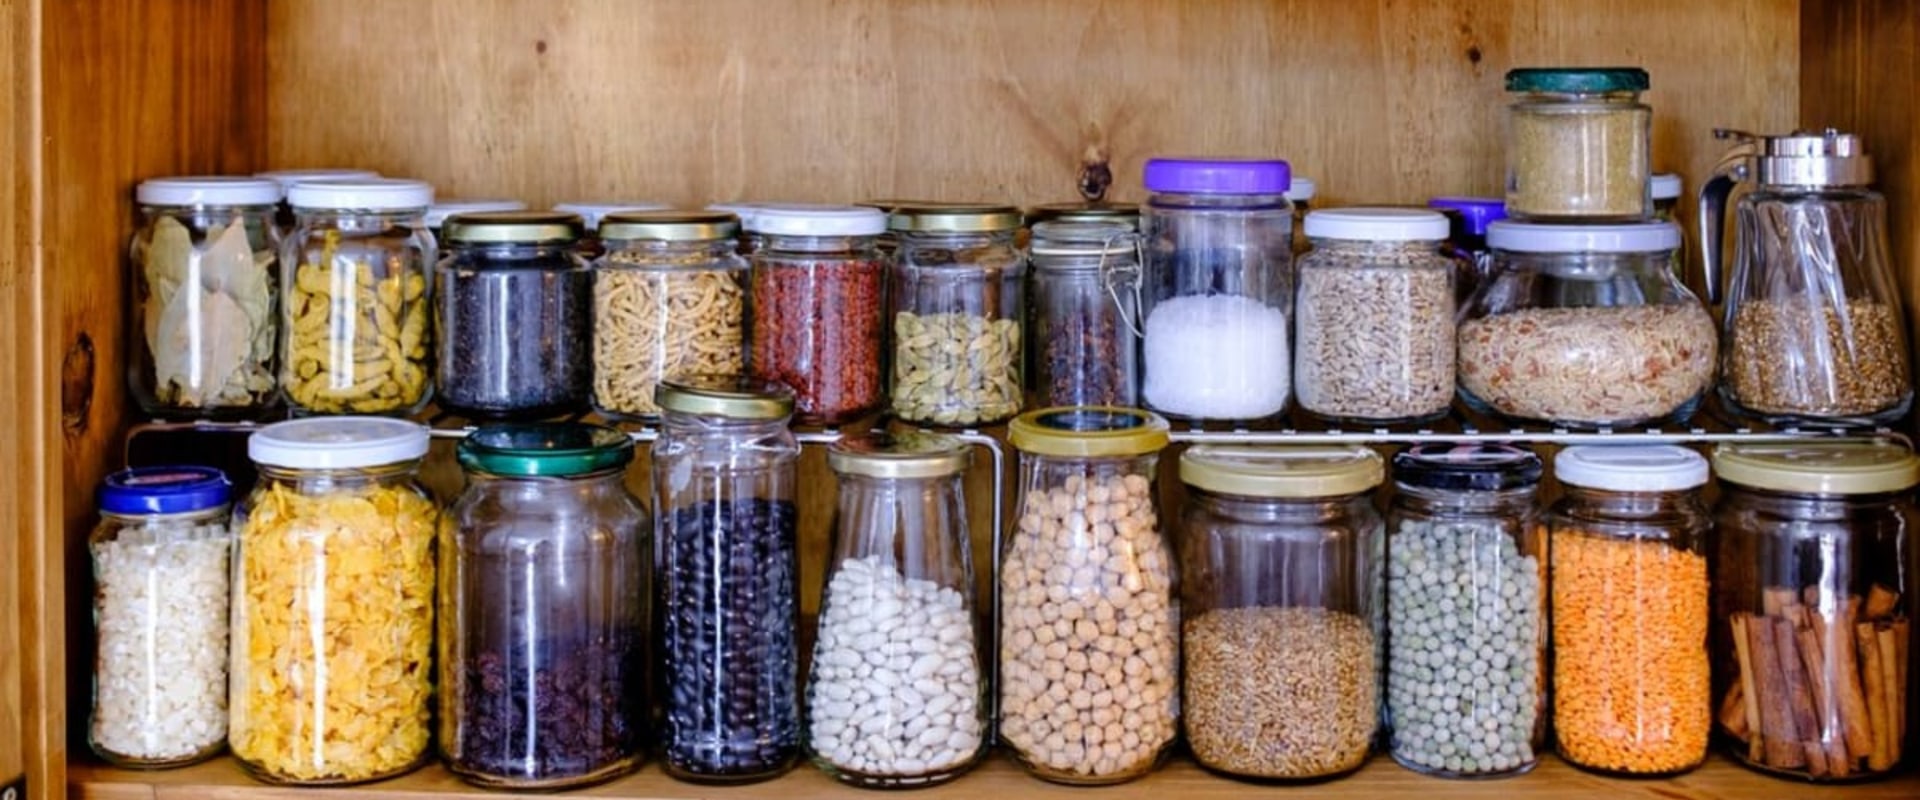 Is it okay to store food in a storage unit?